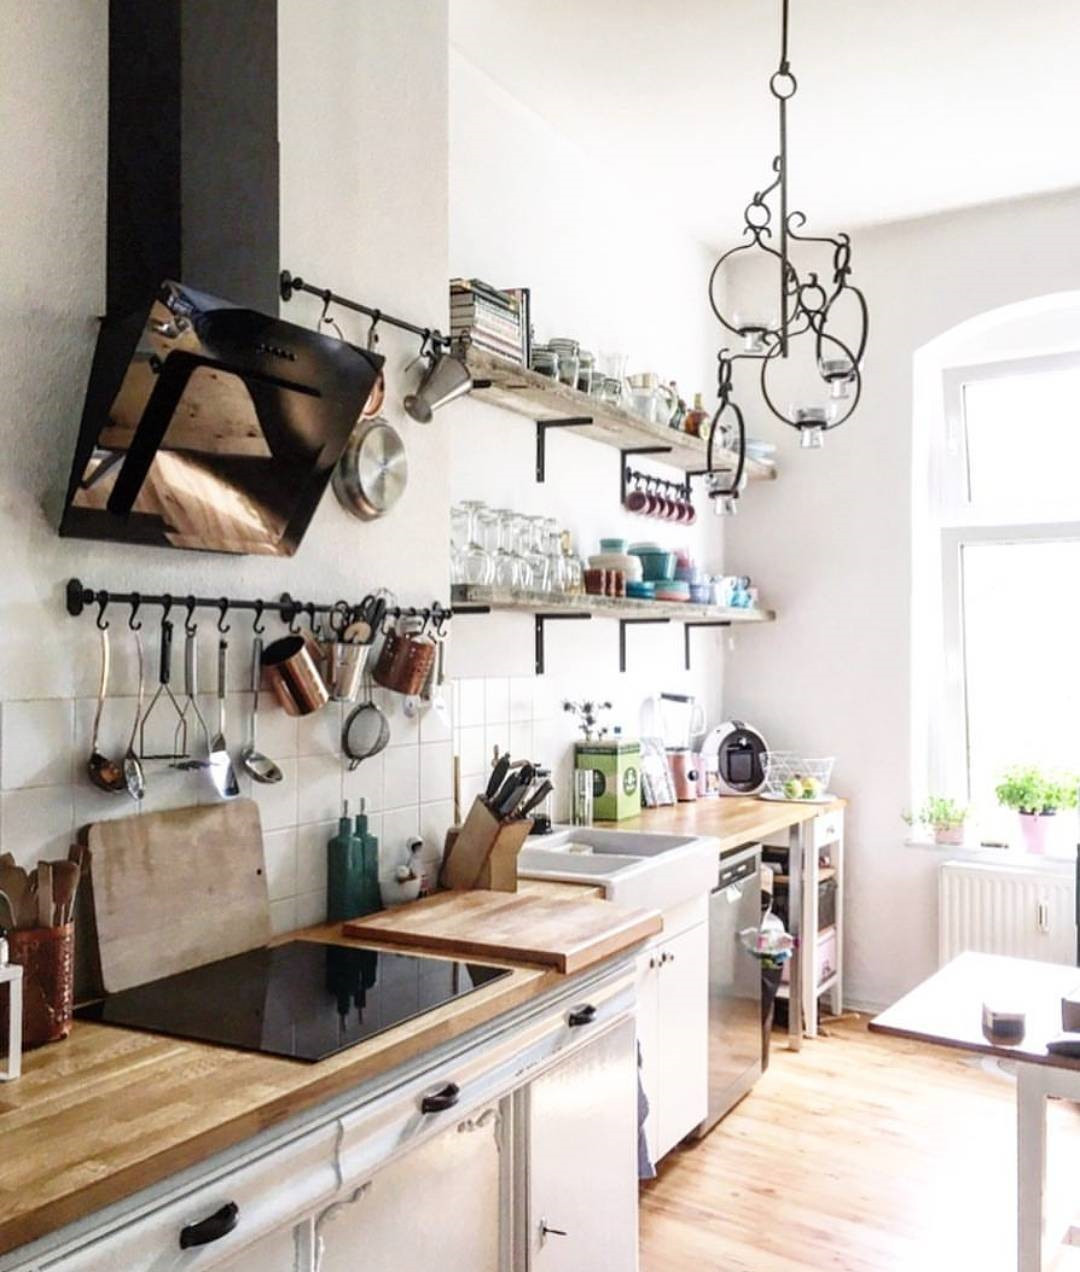 56 of the Very Best Ideas and Solutions for Your Small Kitchen